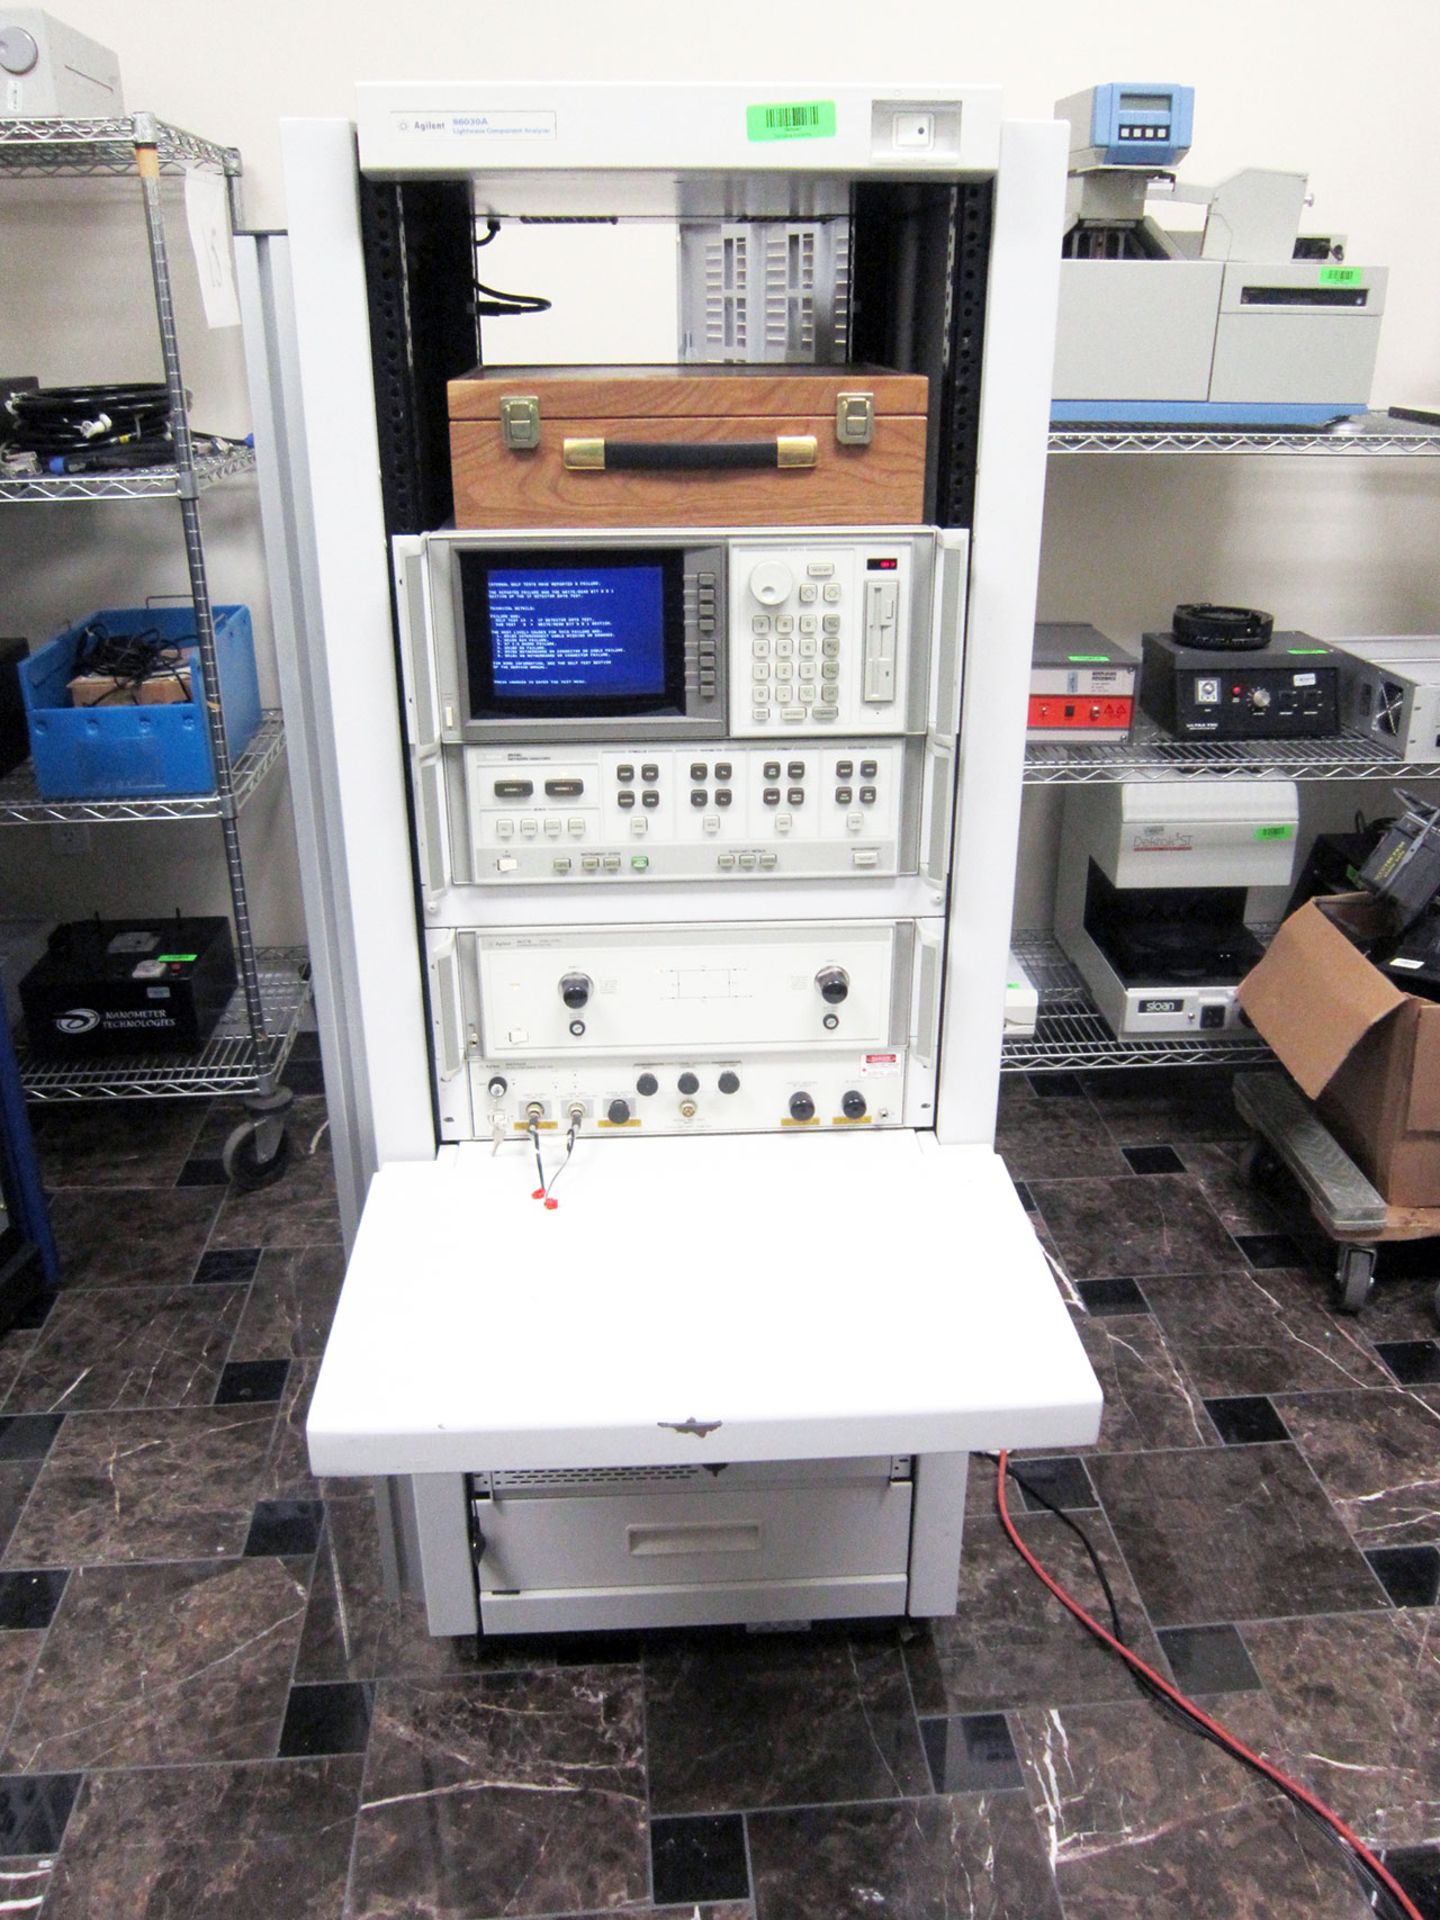 Agilent 86030A Lightwave System Composed of: Agilent 8510C Network Analyzer Opt: 10 with Agilent